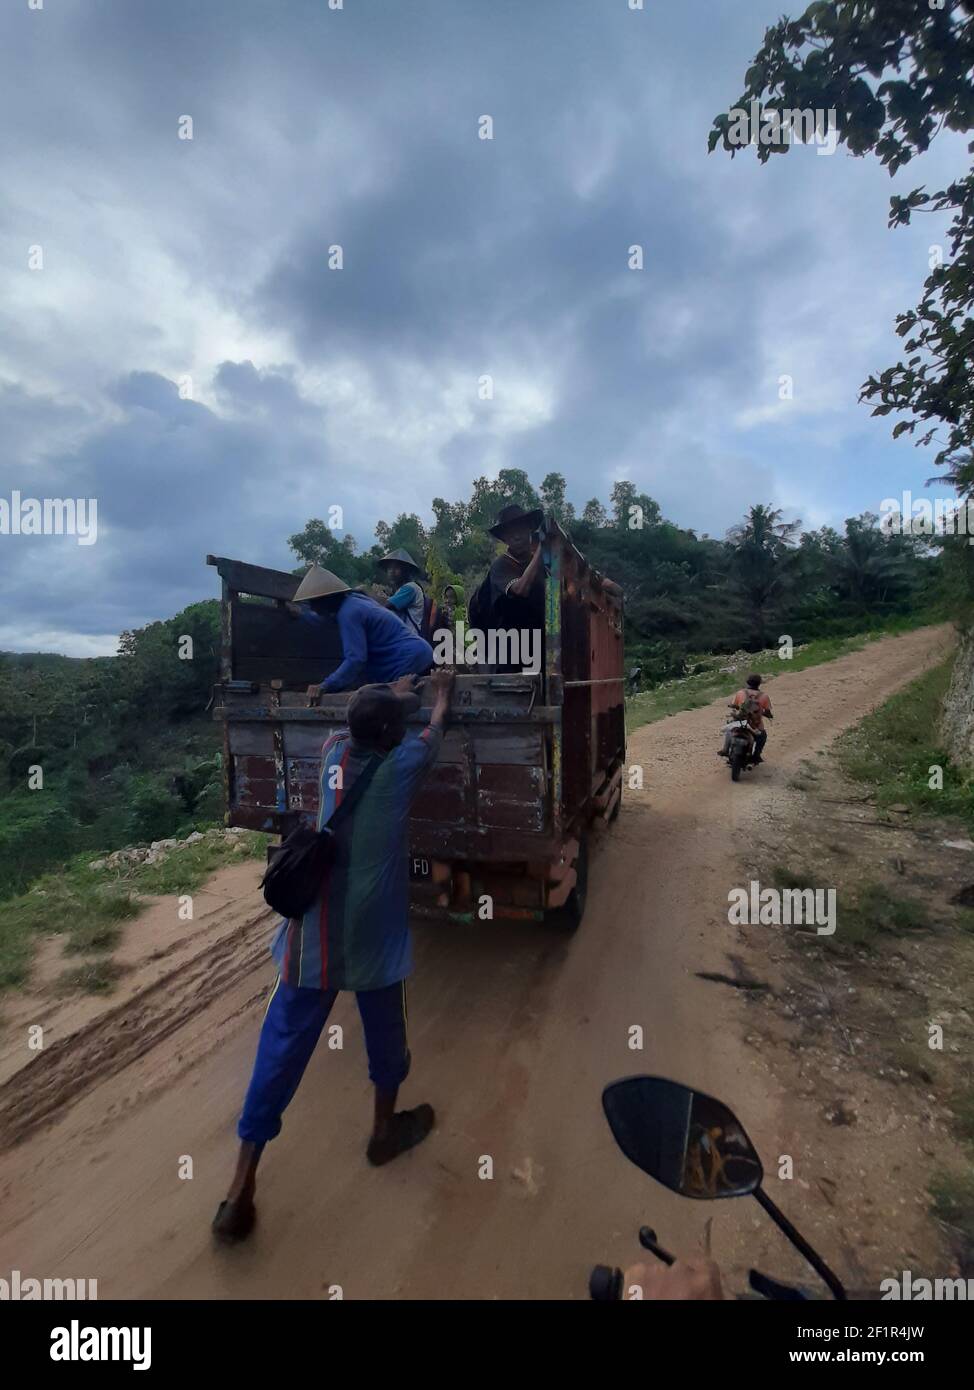 GUNUNG KIDU, INDONESIA - Jun 14, 2020: POV in over head shot from a motorbike overtake a truck with a man climbing on the loading area with more peopl Stock Photo